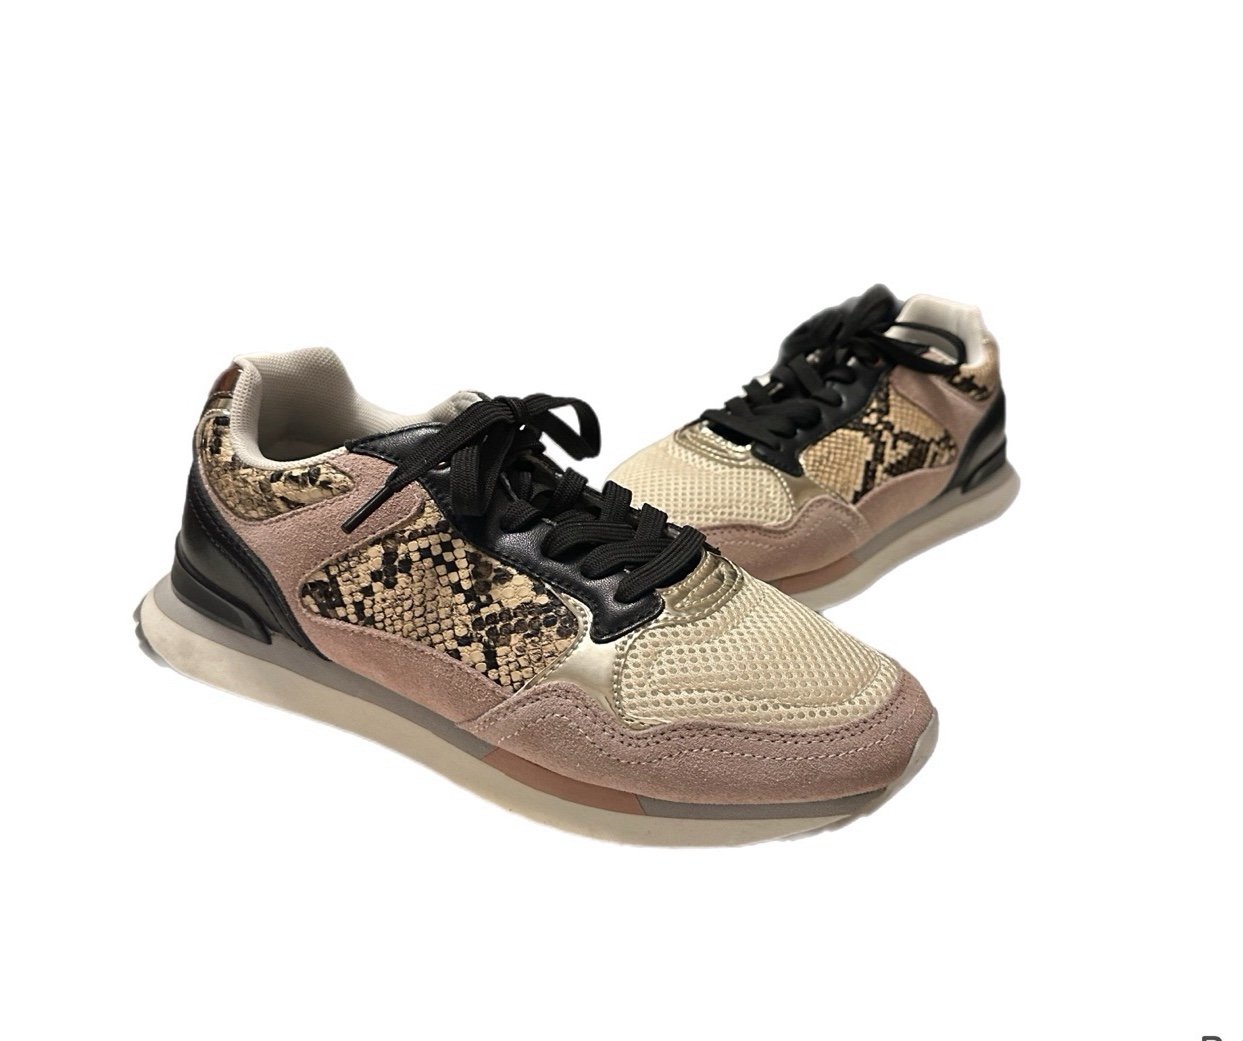 HOFF ATHENS Snake Skin Print Suede Womens Size 8 Sneakers HF5WDMQnq